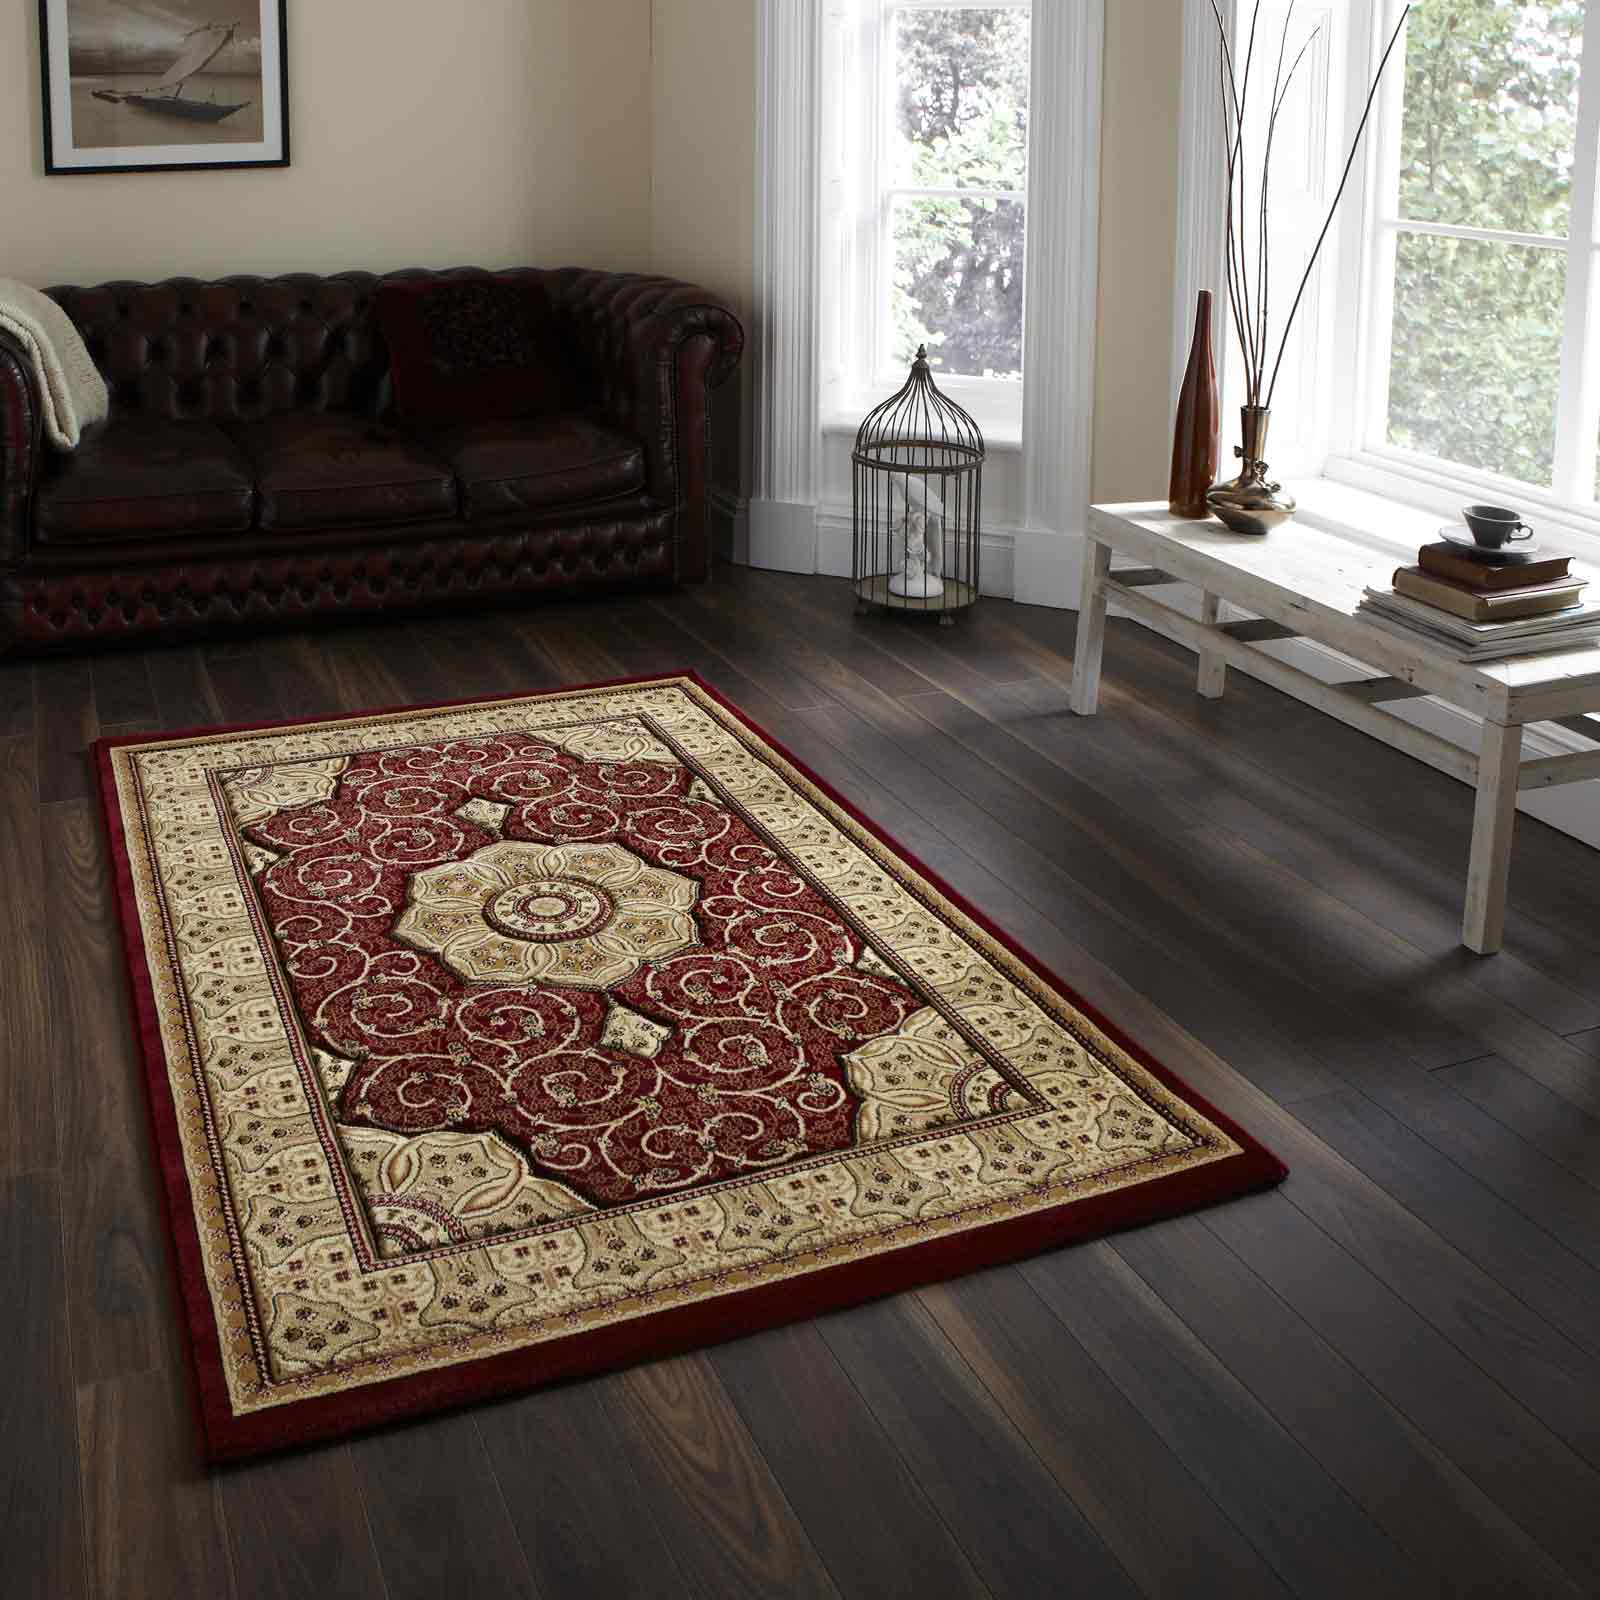 red and gold kilim rug on dark wood floor in lving room with a leather couch